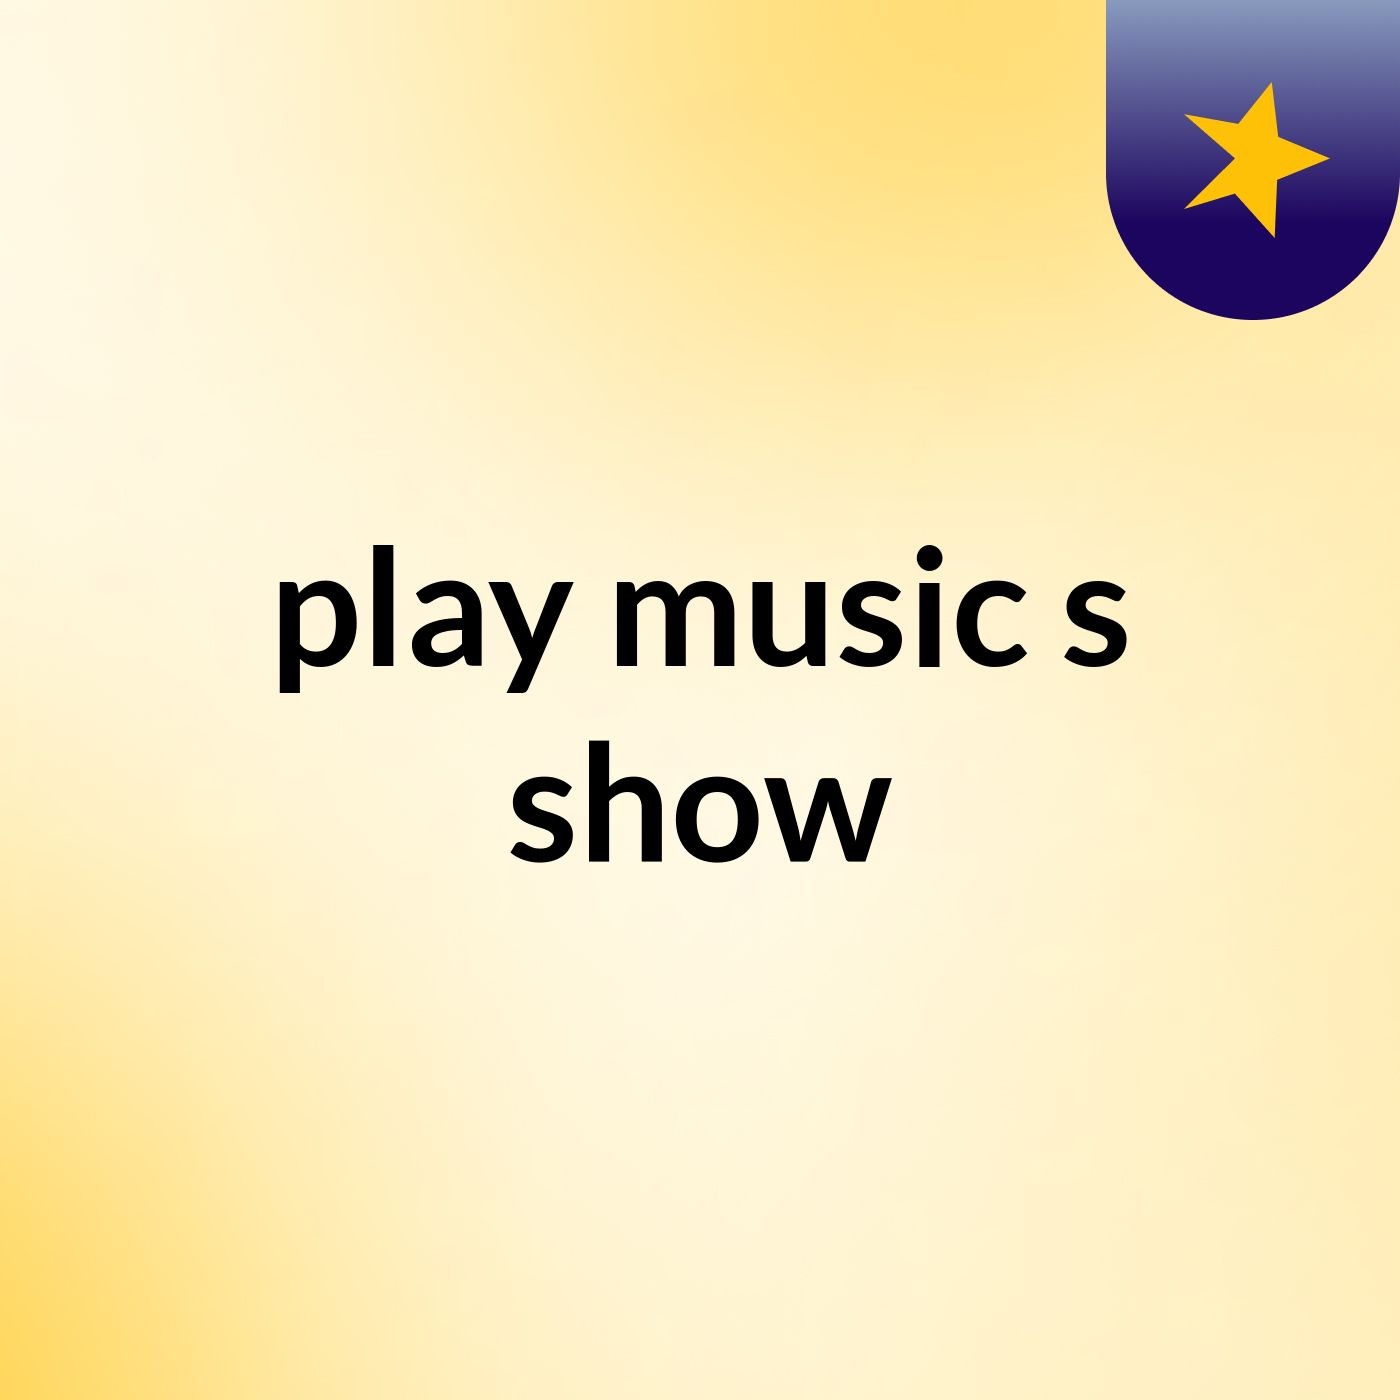 play music's show